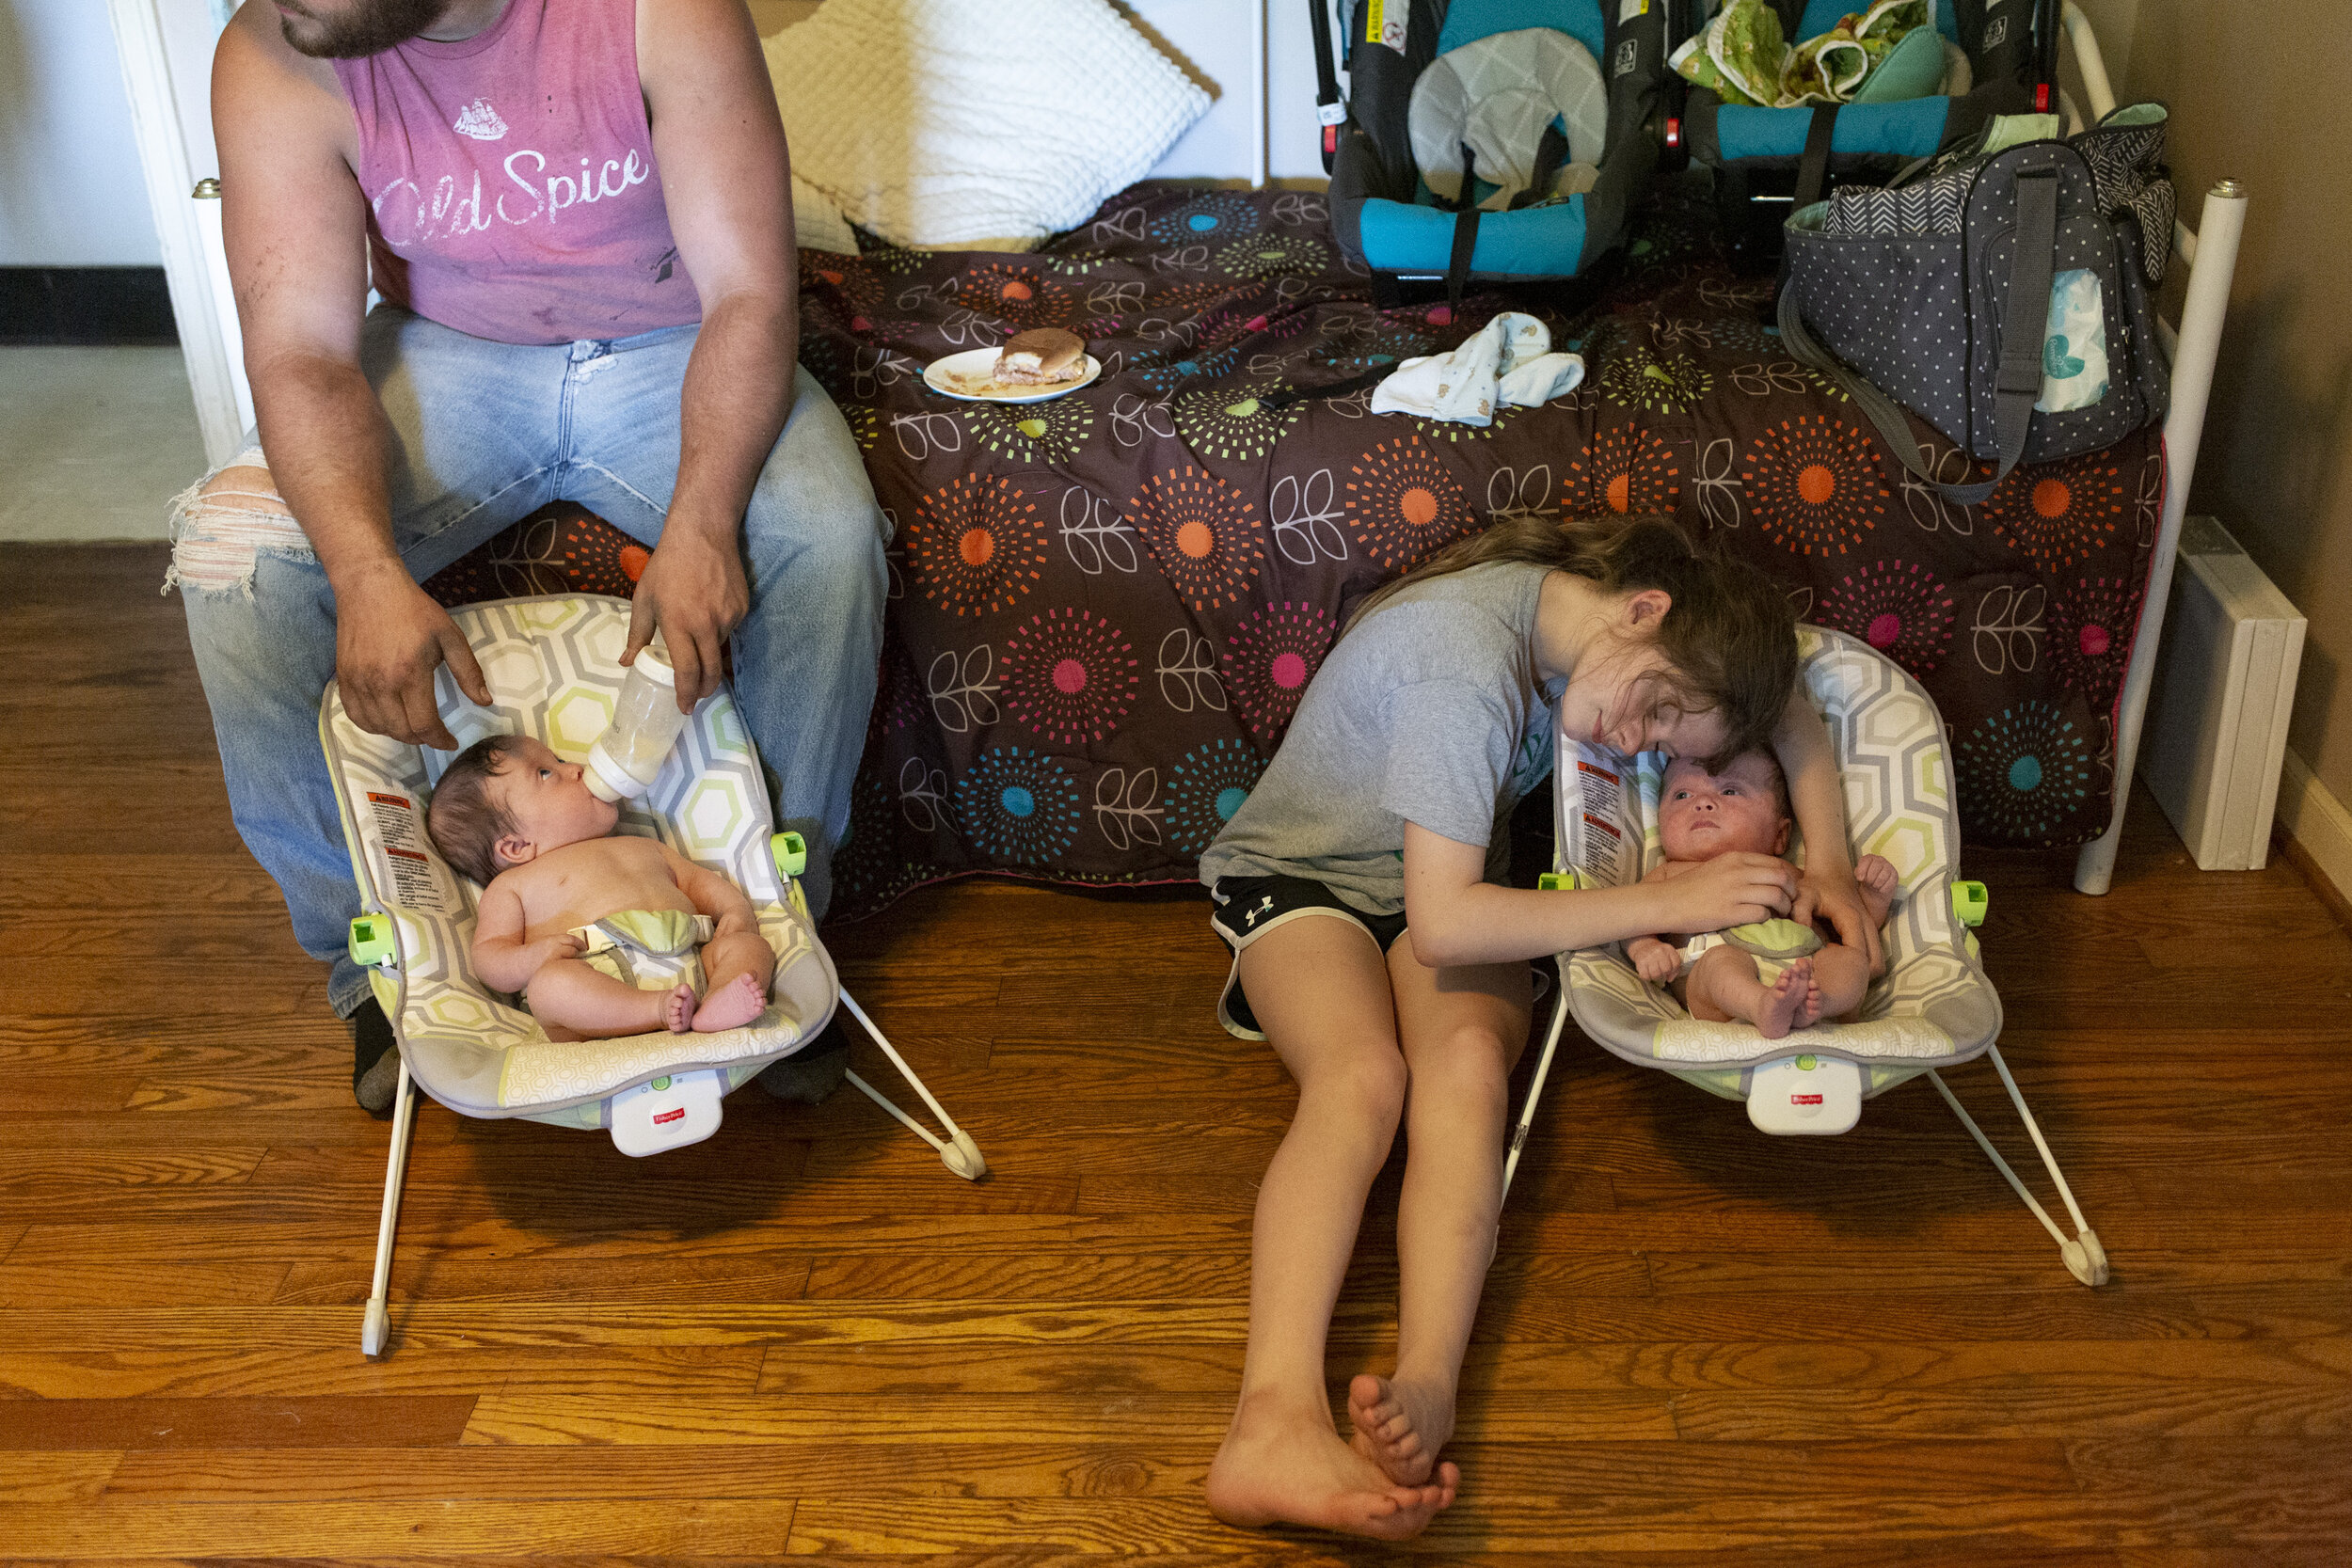  Lizzy Gilchrist, 10, of Sharpsburg, Ohio helps her neighbors care for their twin babies, Eli and Evan Hammer ,4 months, who were recently brought home from the NICU, May 5, 2019.  